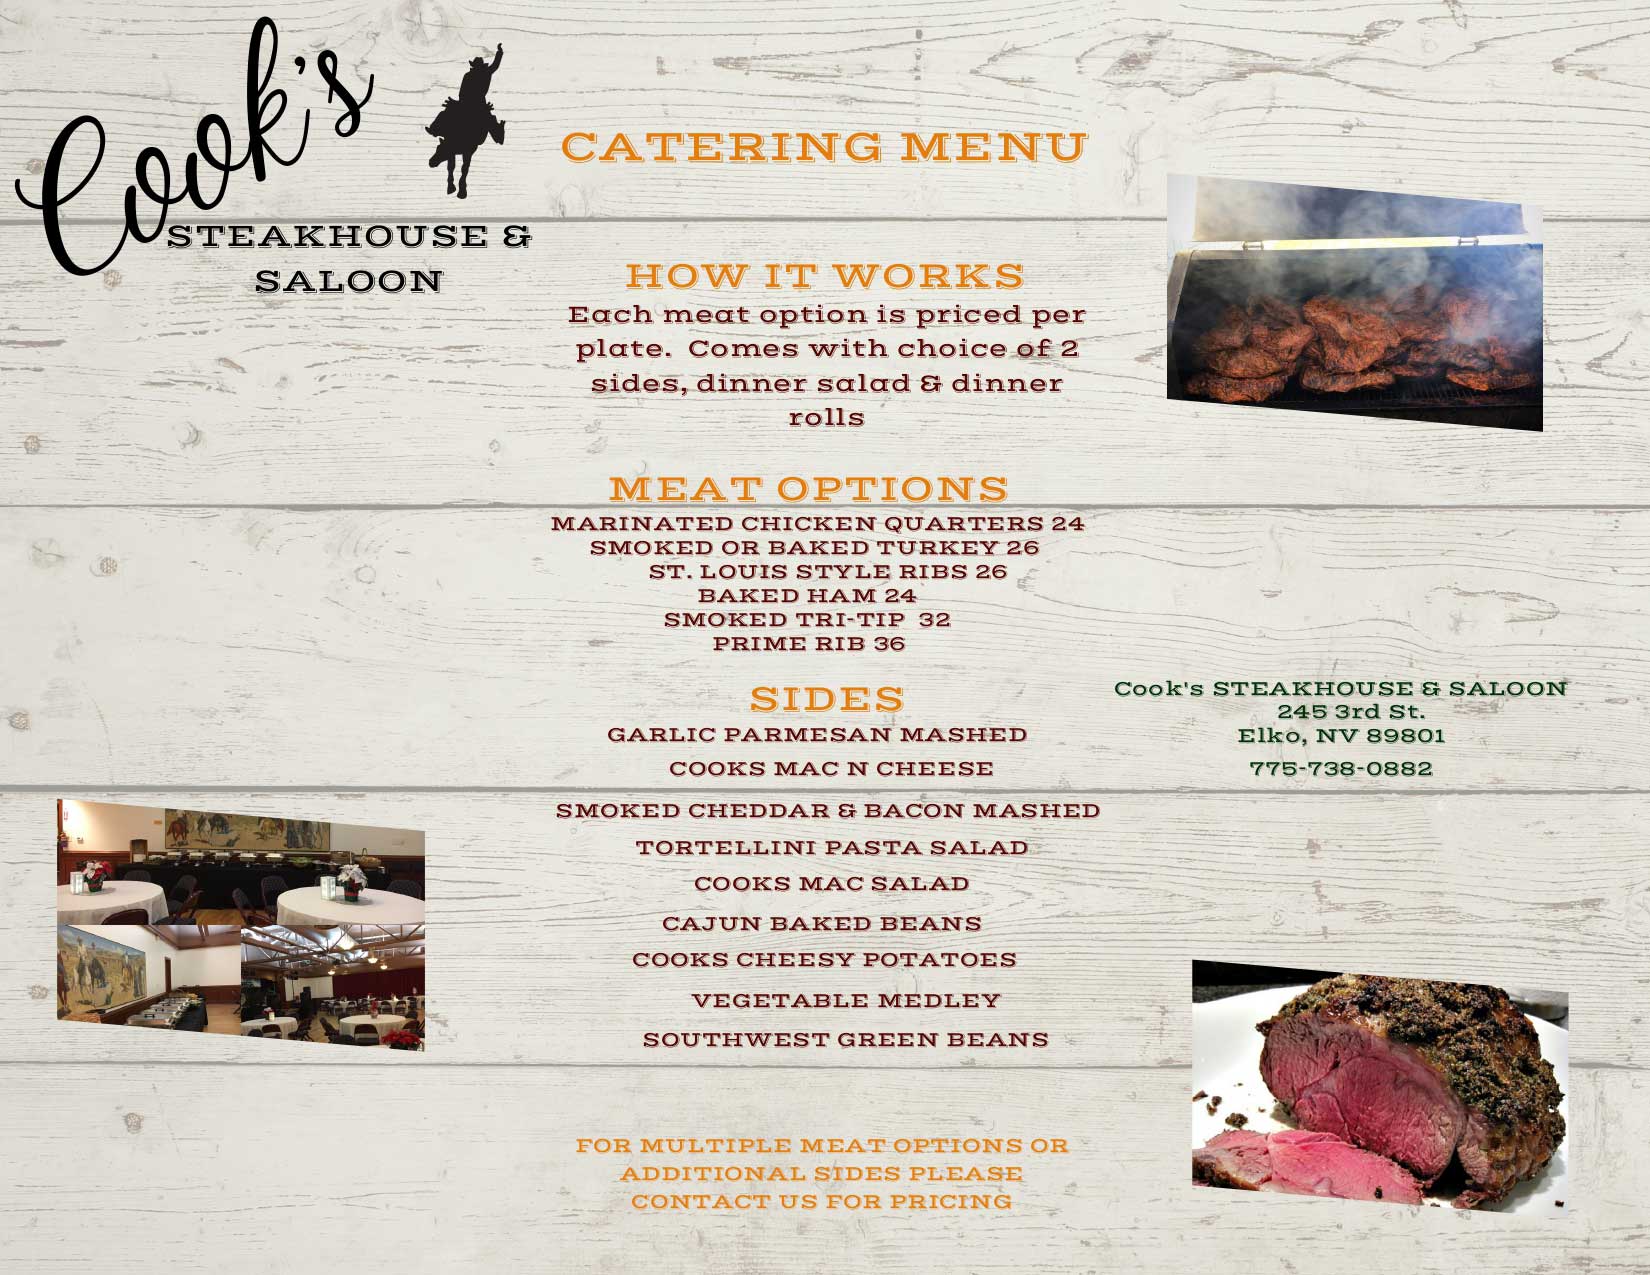 Cooks-Steakhouse-Catering-Menu-1-18-22